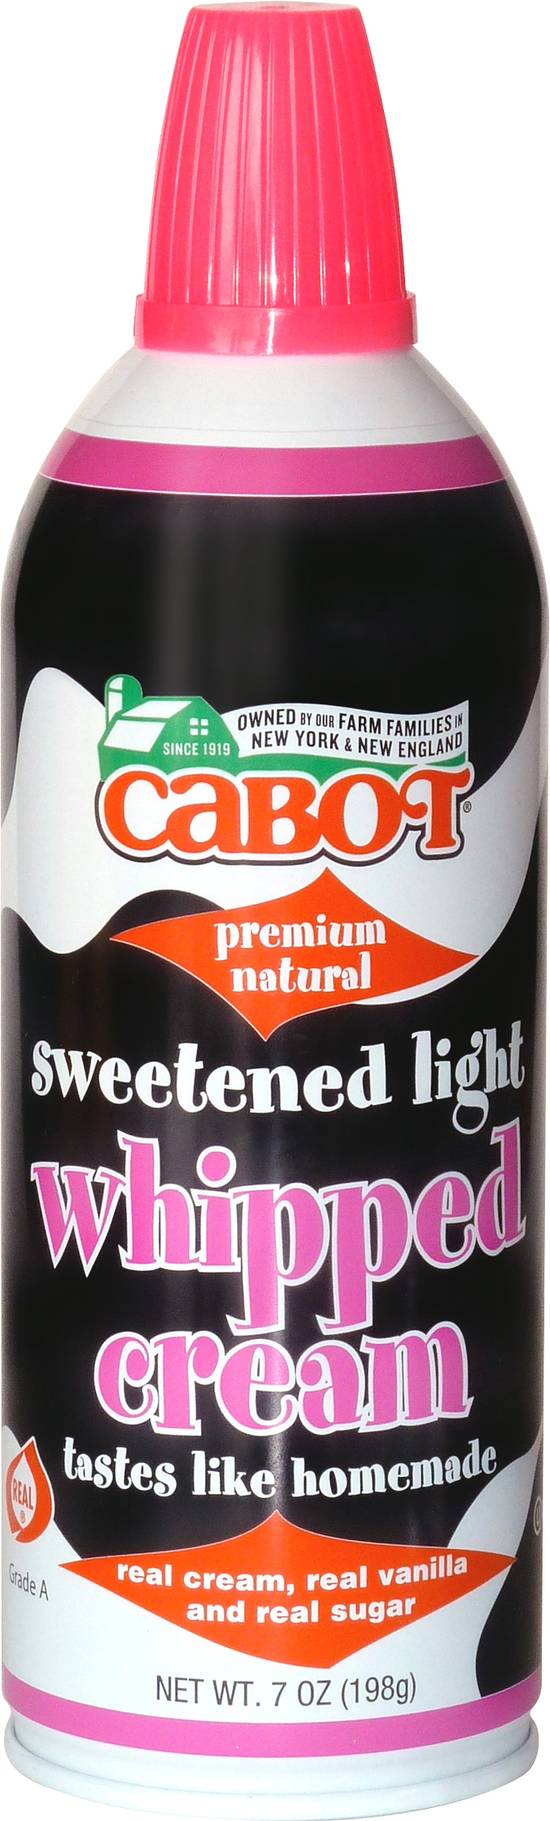 Cabot Sweetened Light Whipped Cream